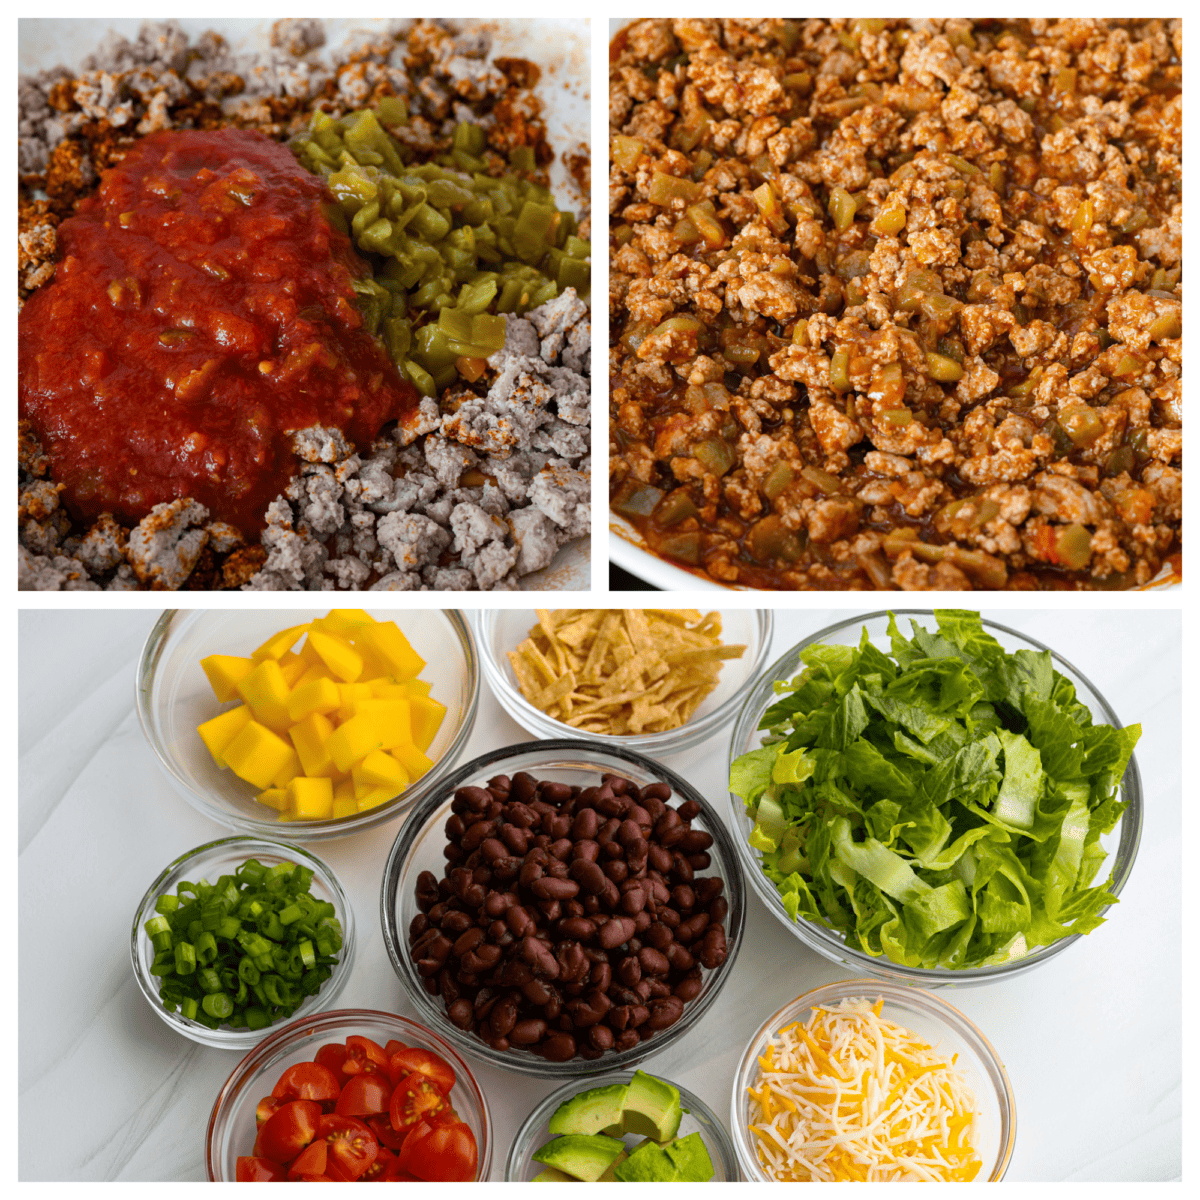 3-photo collage of the ground turkey and toppings being prepared.